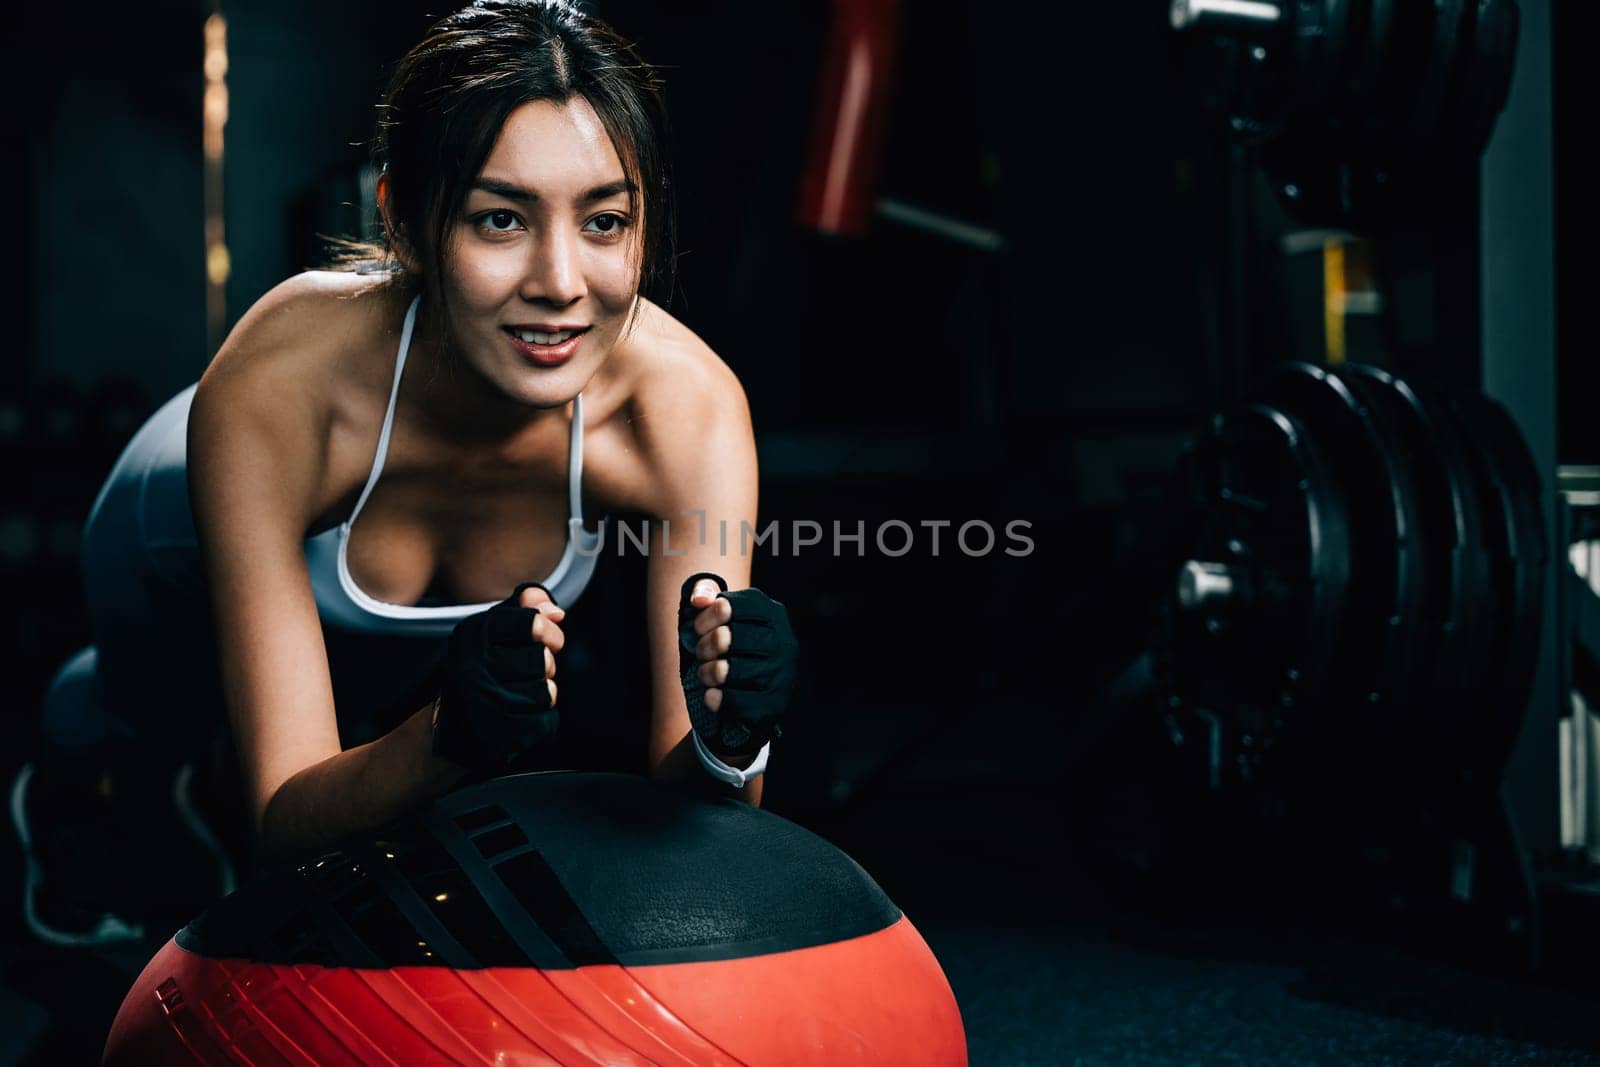 Fit young woman maintaining a plank position on a stability ball to improve core strength by Sorapop